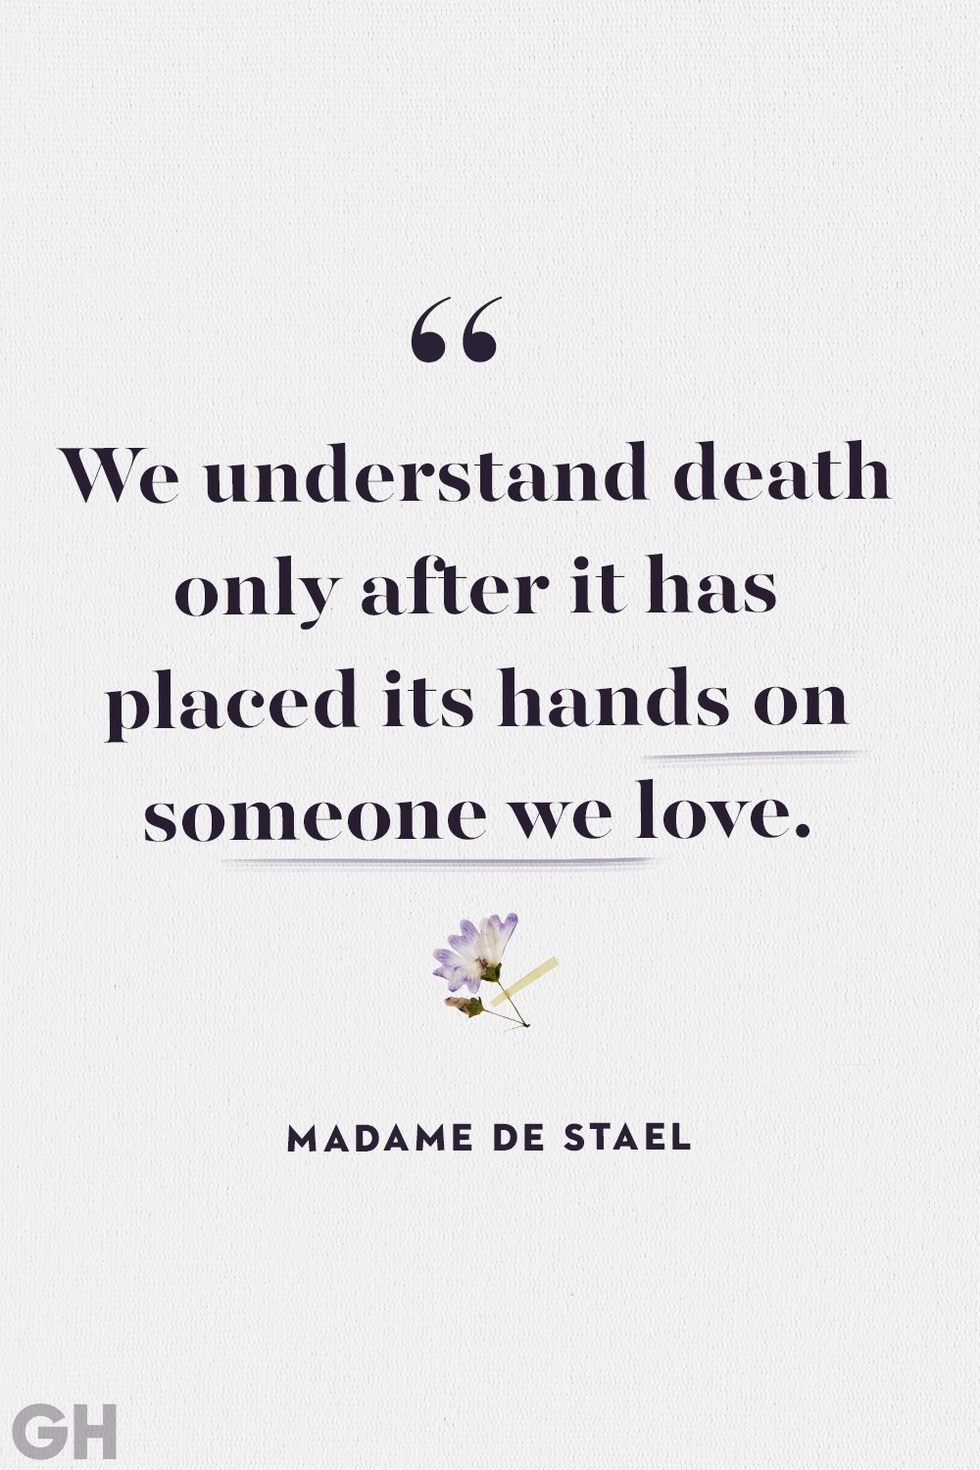 we understand death only after it has placed its hands on someone we love